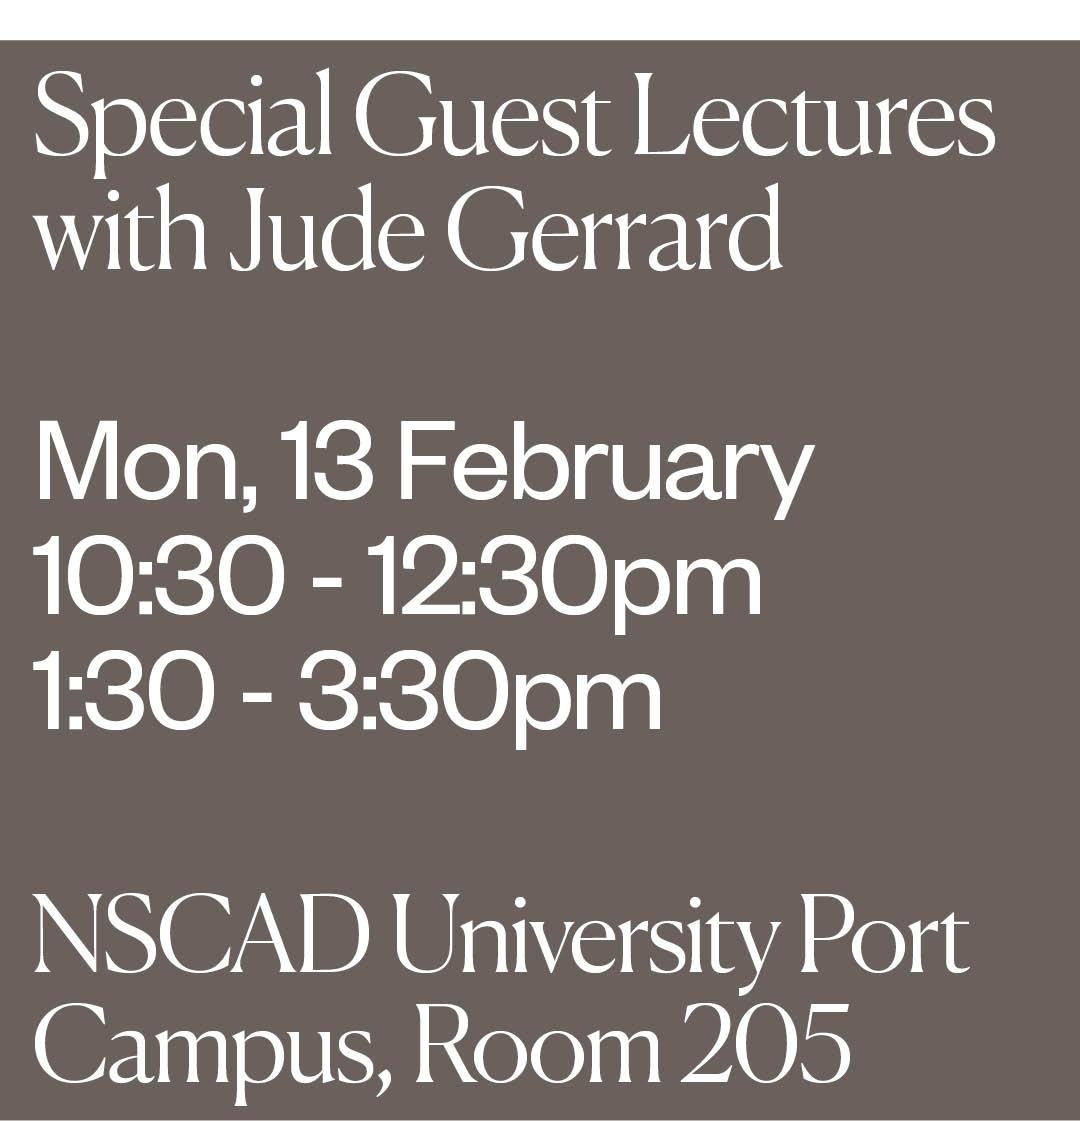 Medium dark grey back ground with white text at top that reads “Special Guest Lectures with Jude Gerrard, 10:30 - 12:30pm, 1:30 - 3:30pm. White text at bottom that reads “NSCAD University Port Campus, Room 205"